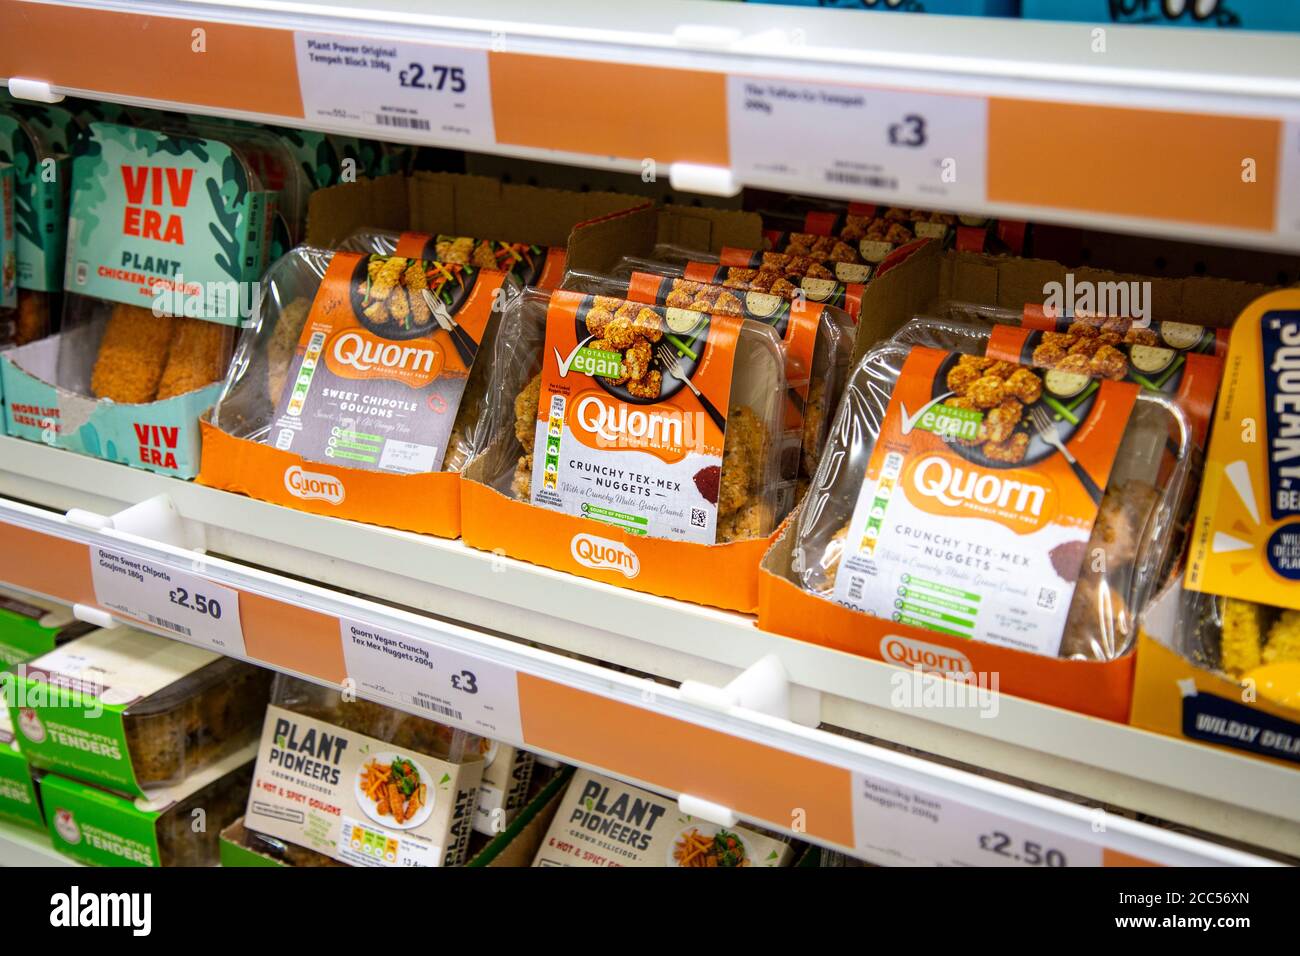 Meat alternatives at a supermarket, Quorn imitation meat for vegans and vegetarians, London, UK Stock Photo